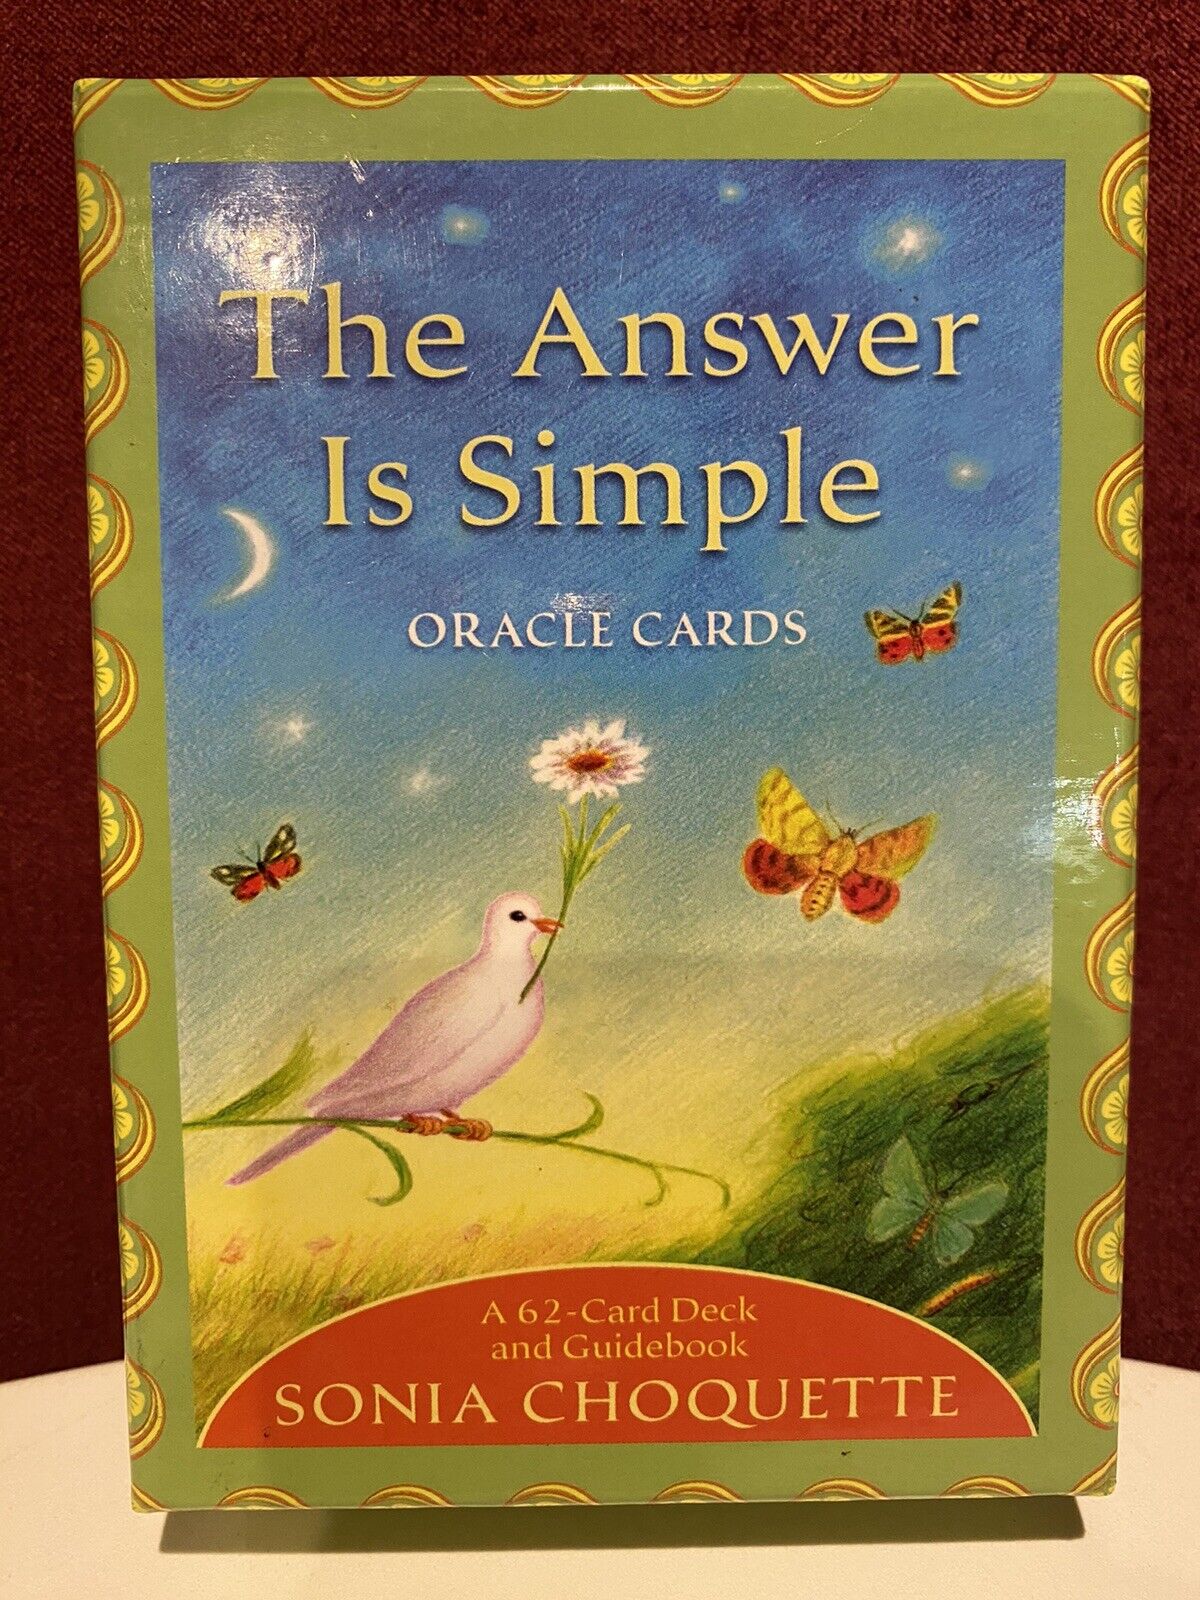 ORIGINAL 2008 THE ANSWER IS SIMPLE ORACLE TAROT CARD DECK SONIA CHOQUETTE EXC